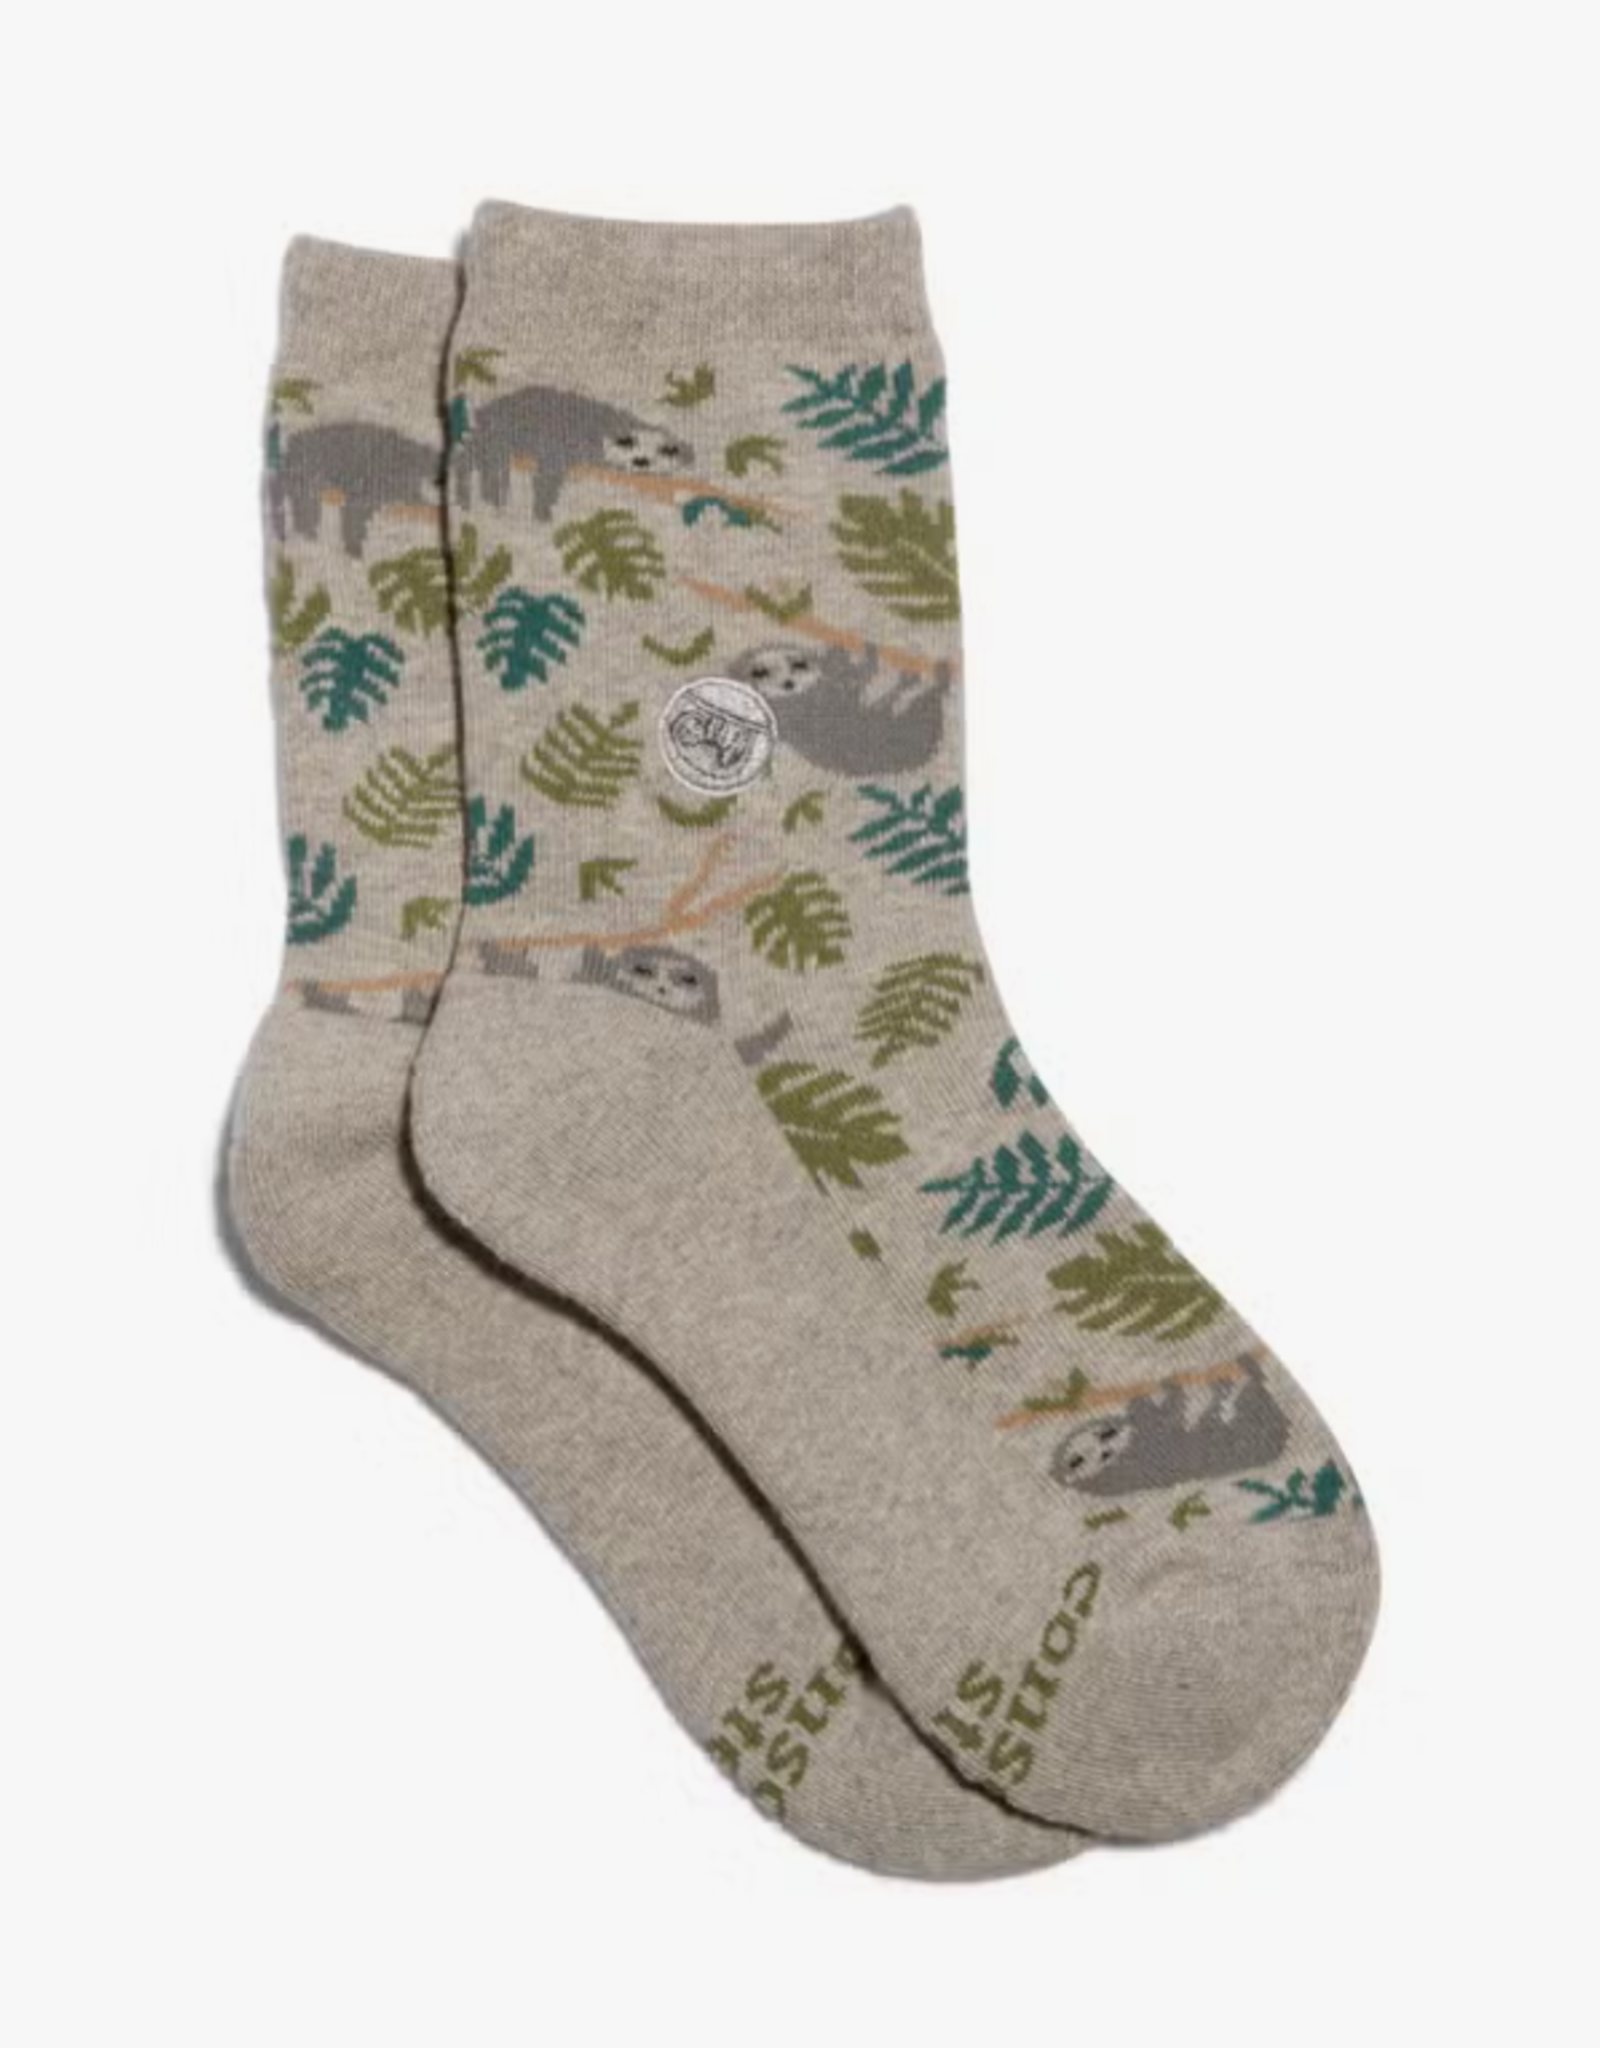 Conscious Step Kids Socks that Protect Sloths